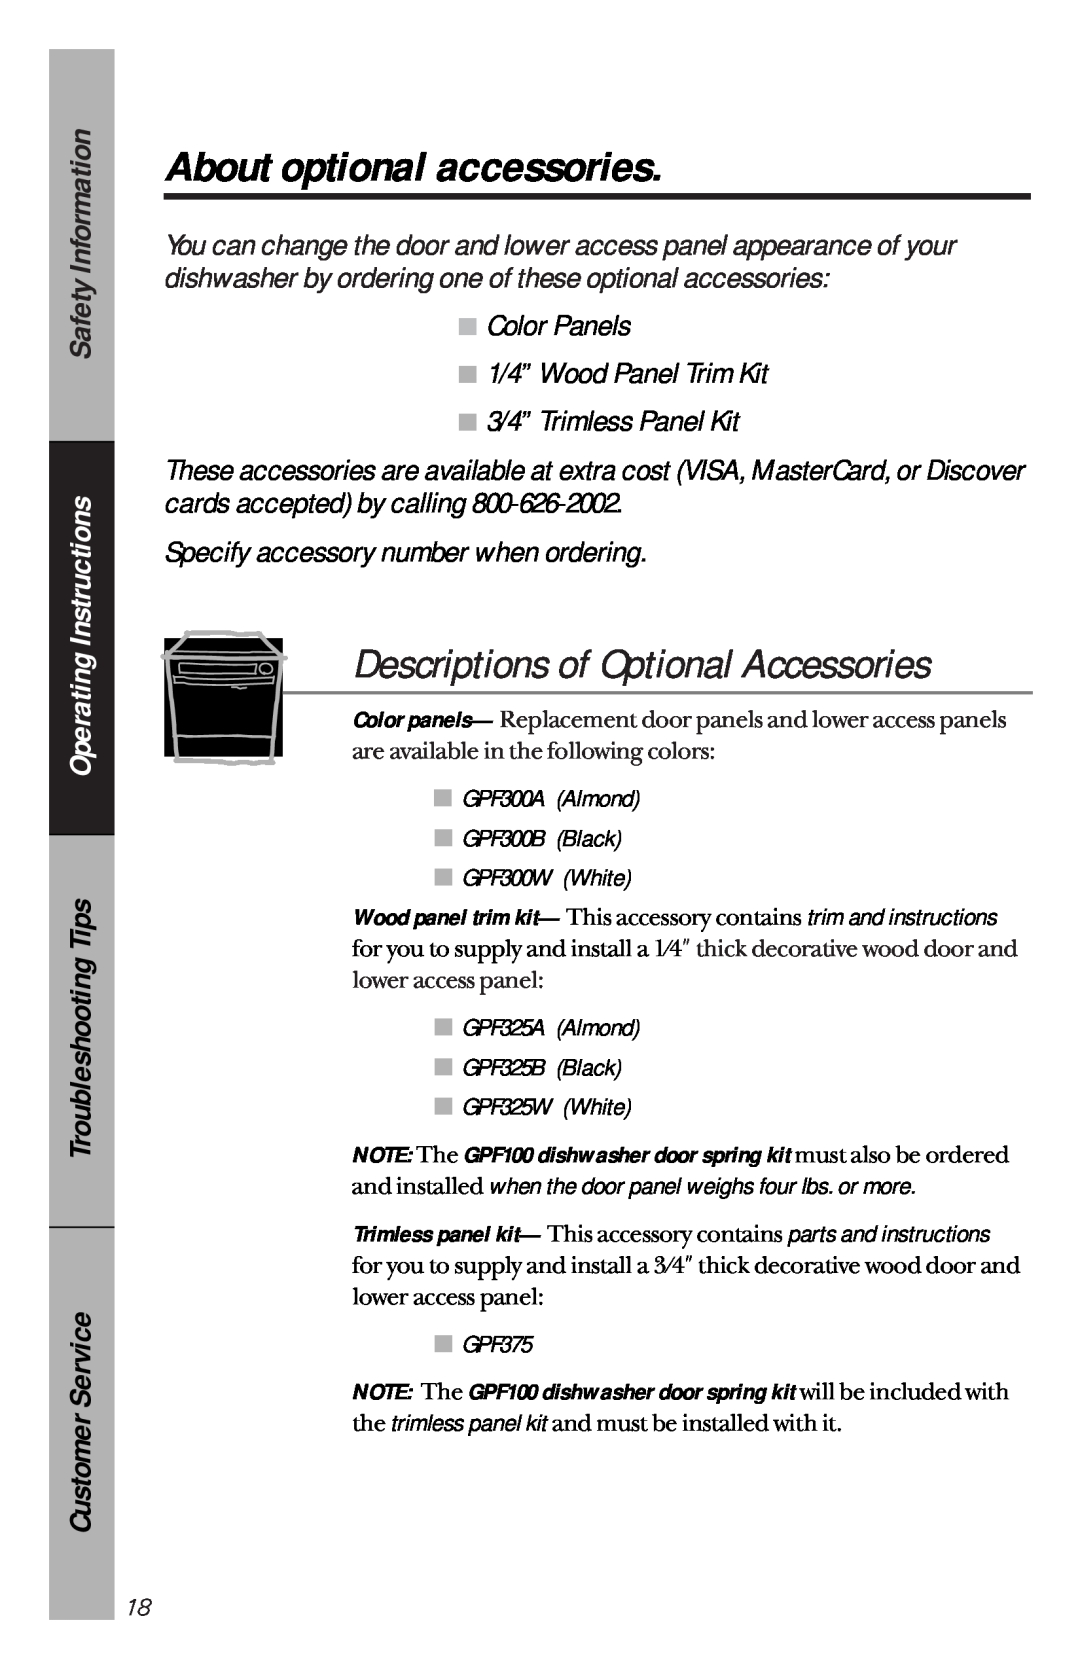 GE GSD3610 About optional accessories, Descriptions of Optional Accessories, Specify accessory number when ordering 